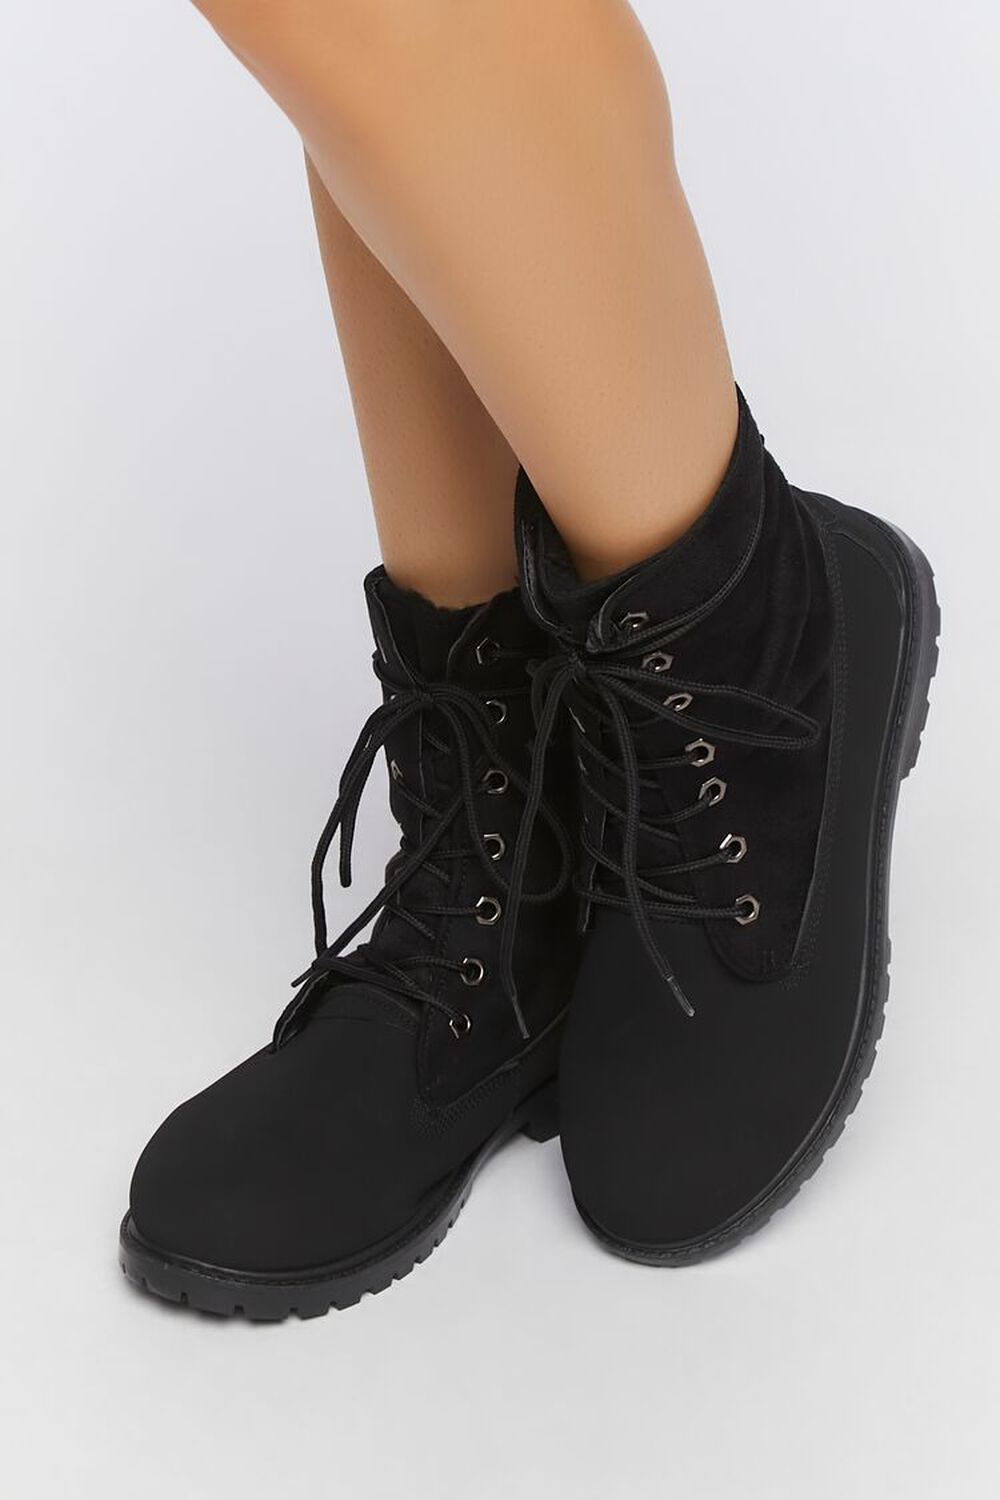 BLACK Faux Suede Lace-Up Booties, image 1